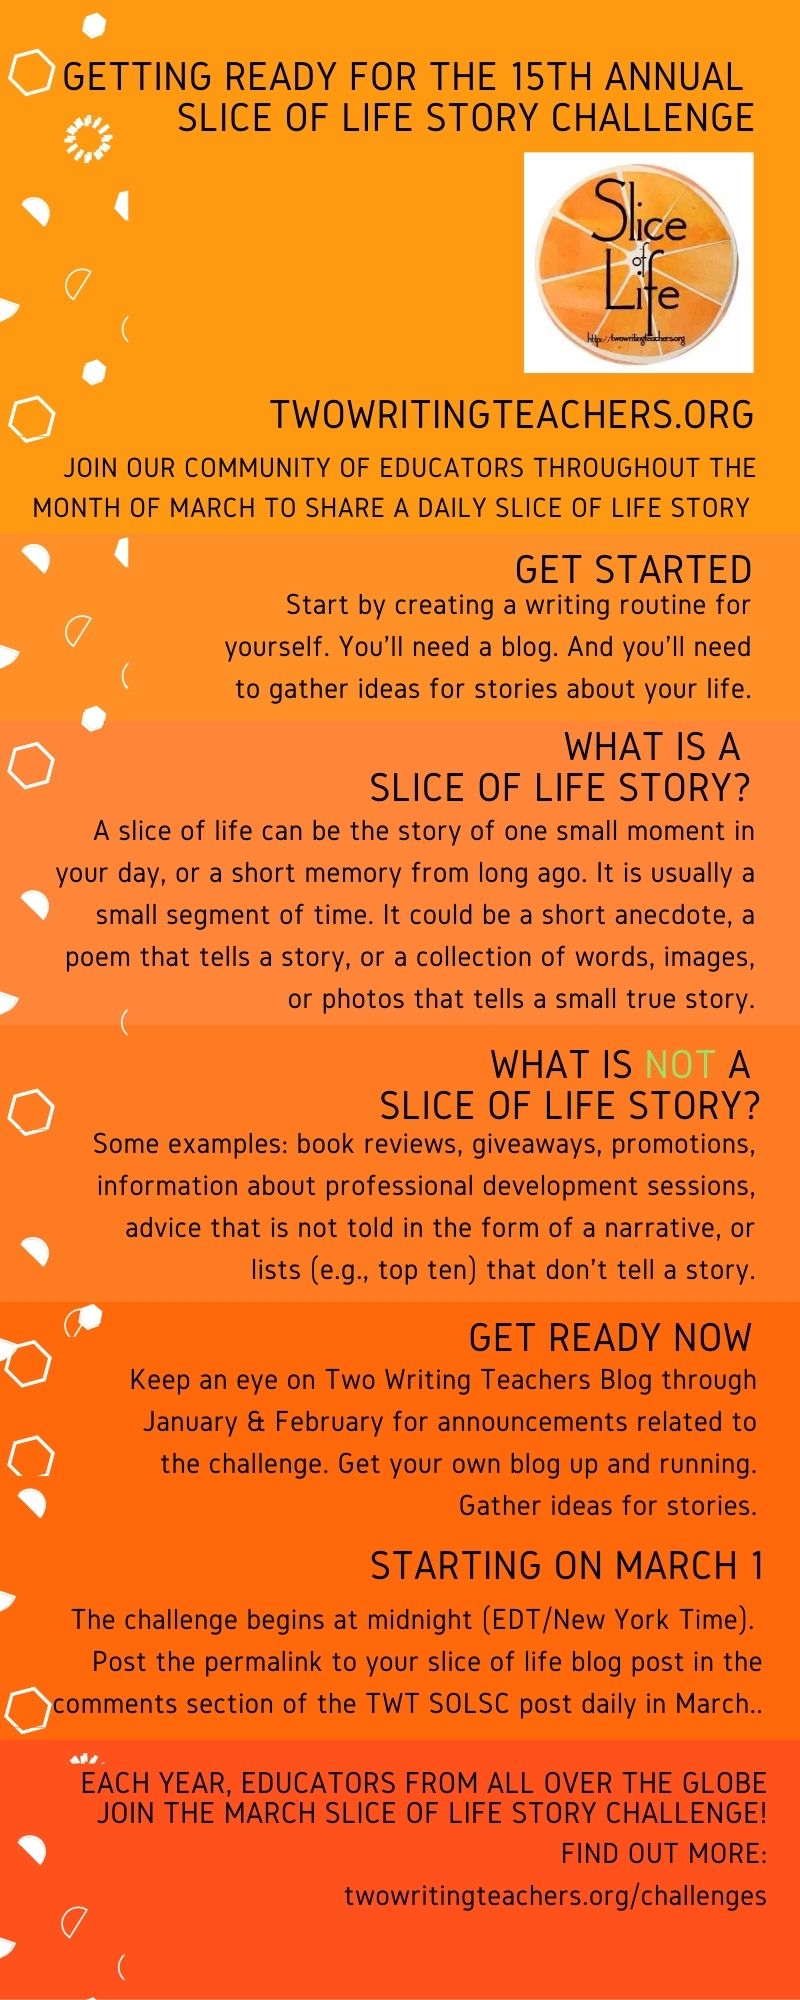 How To Start Writing Your Life Story